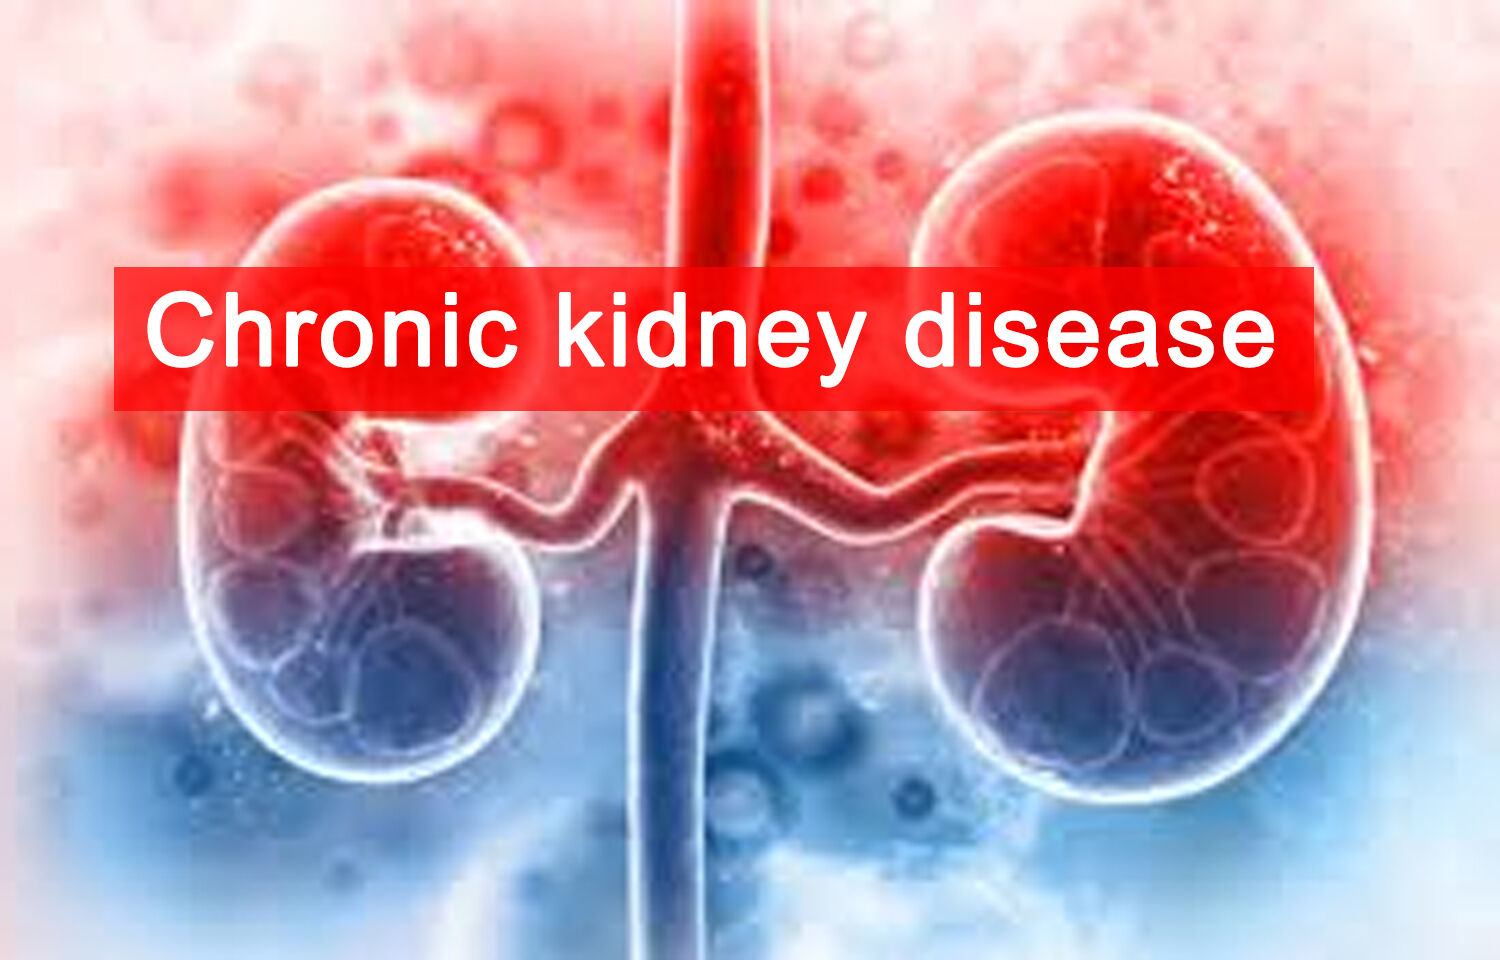 family-history-of-kidney-disease-strongly-linked-to-increased-ckd-risk